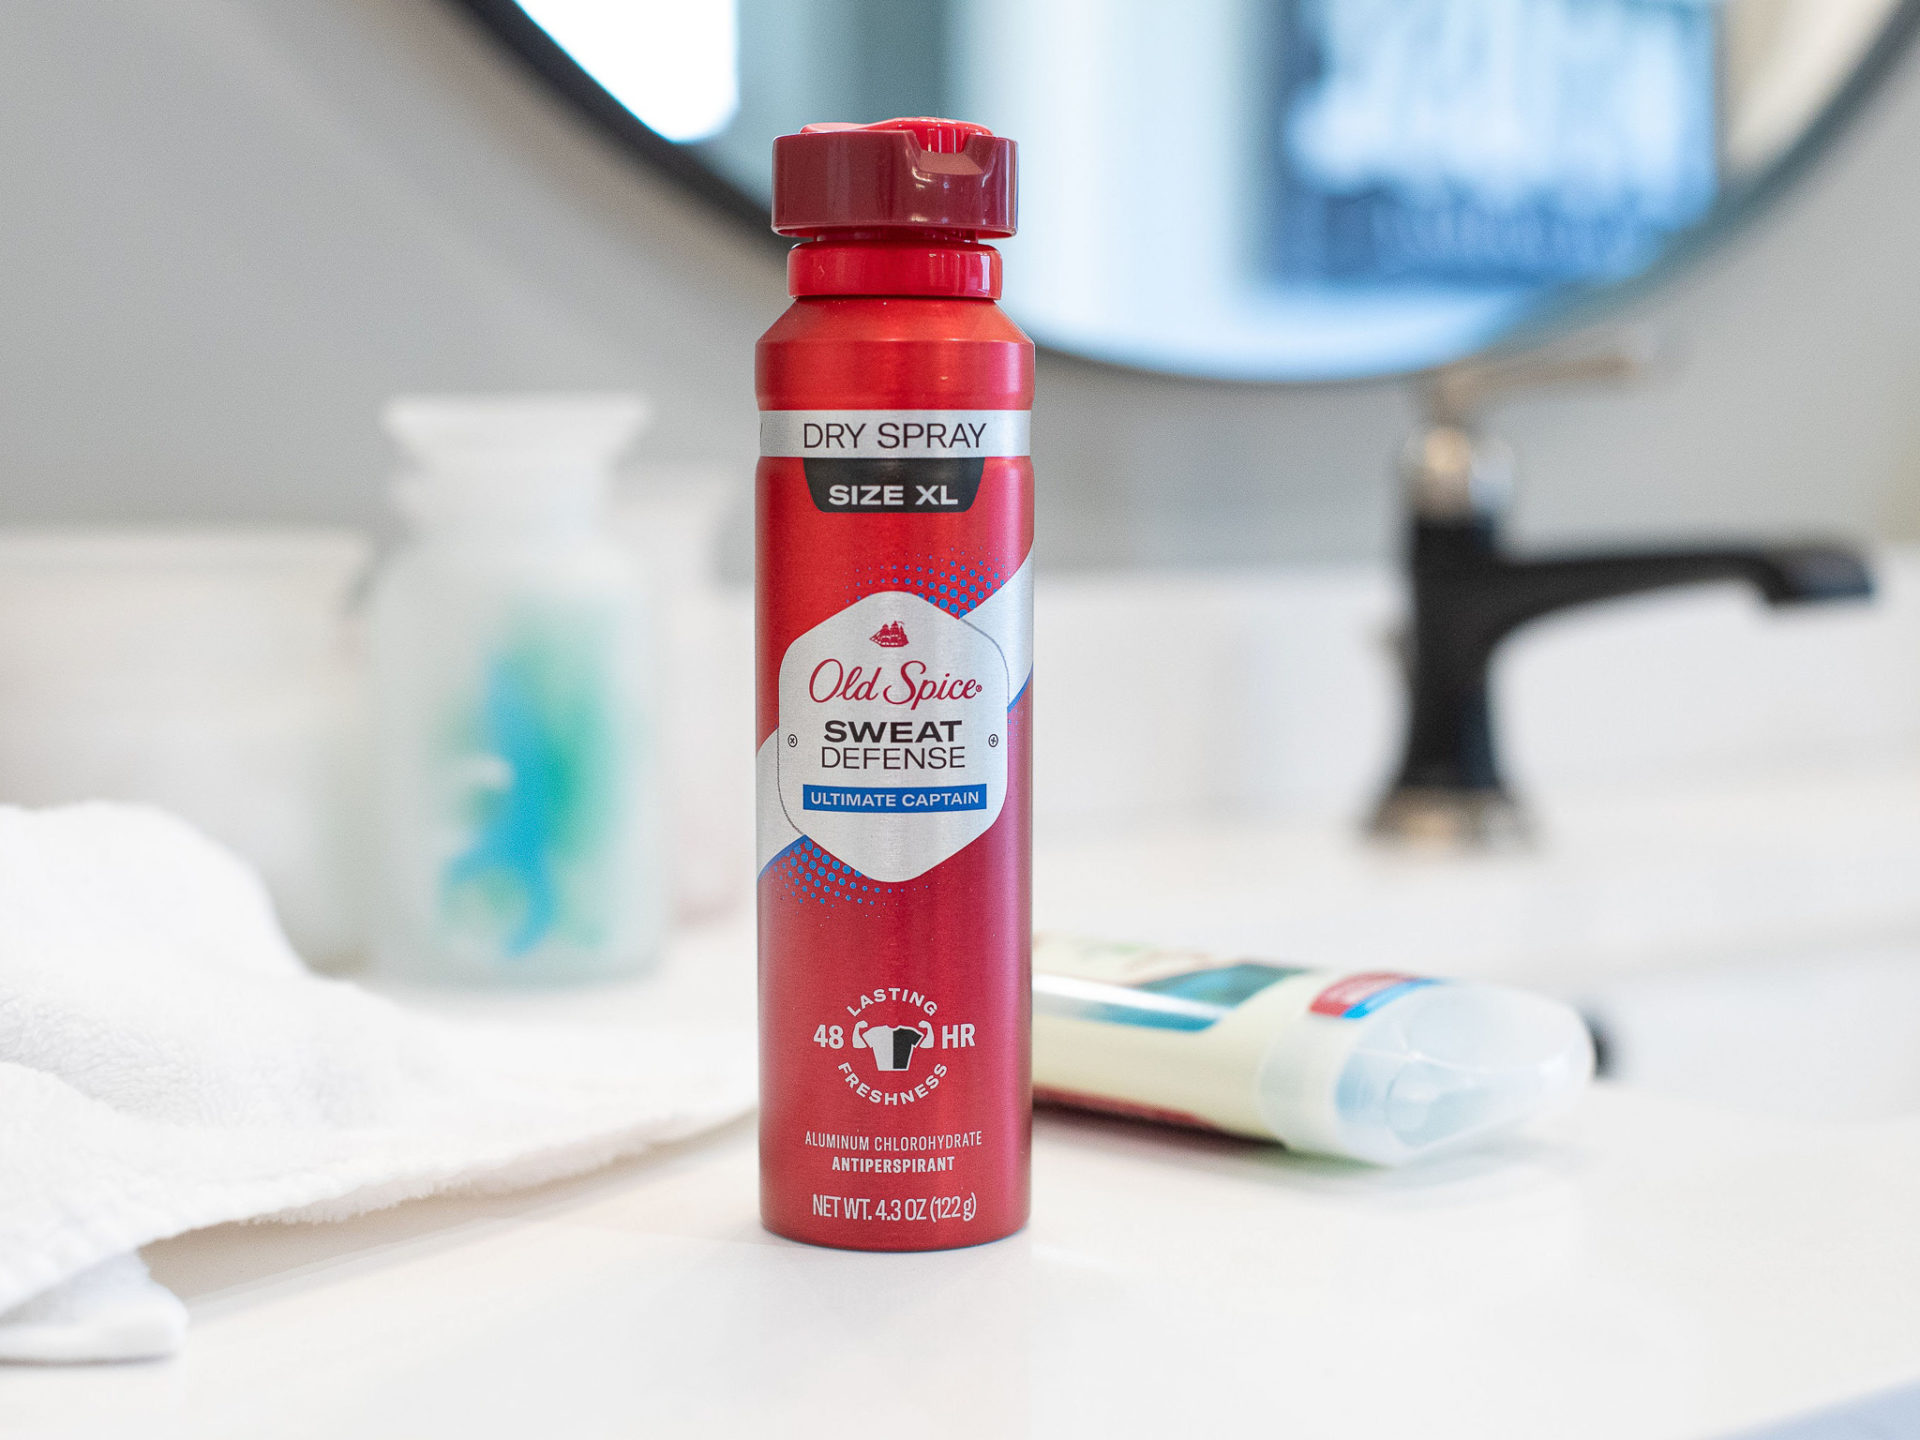 Old Spice Dry Spray Just $4.99 At Kroger